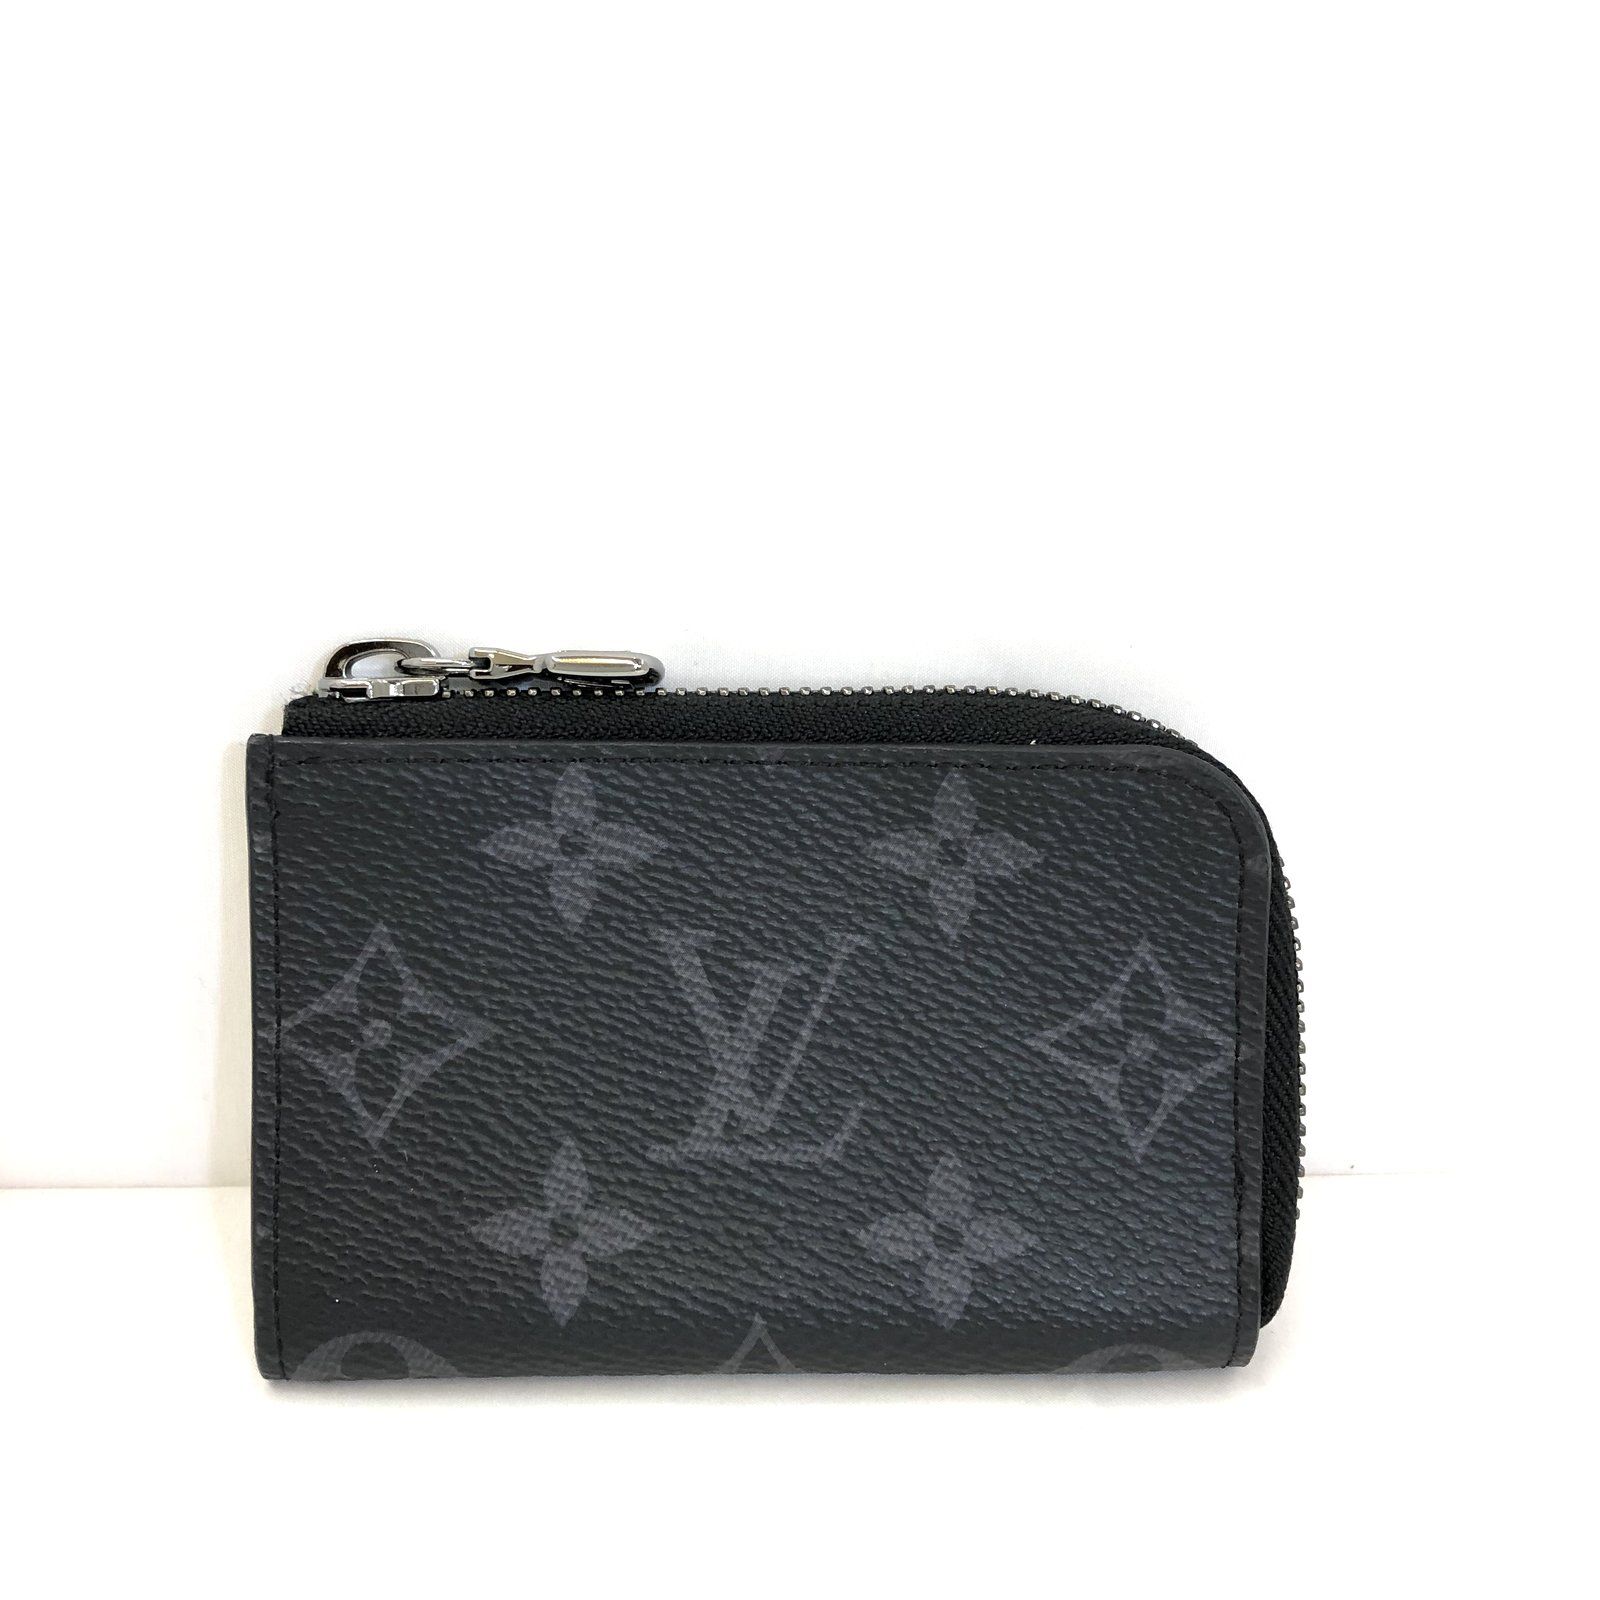 LOUIS VUITTON ルイヴィトン コインケース M63536